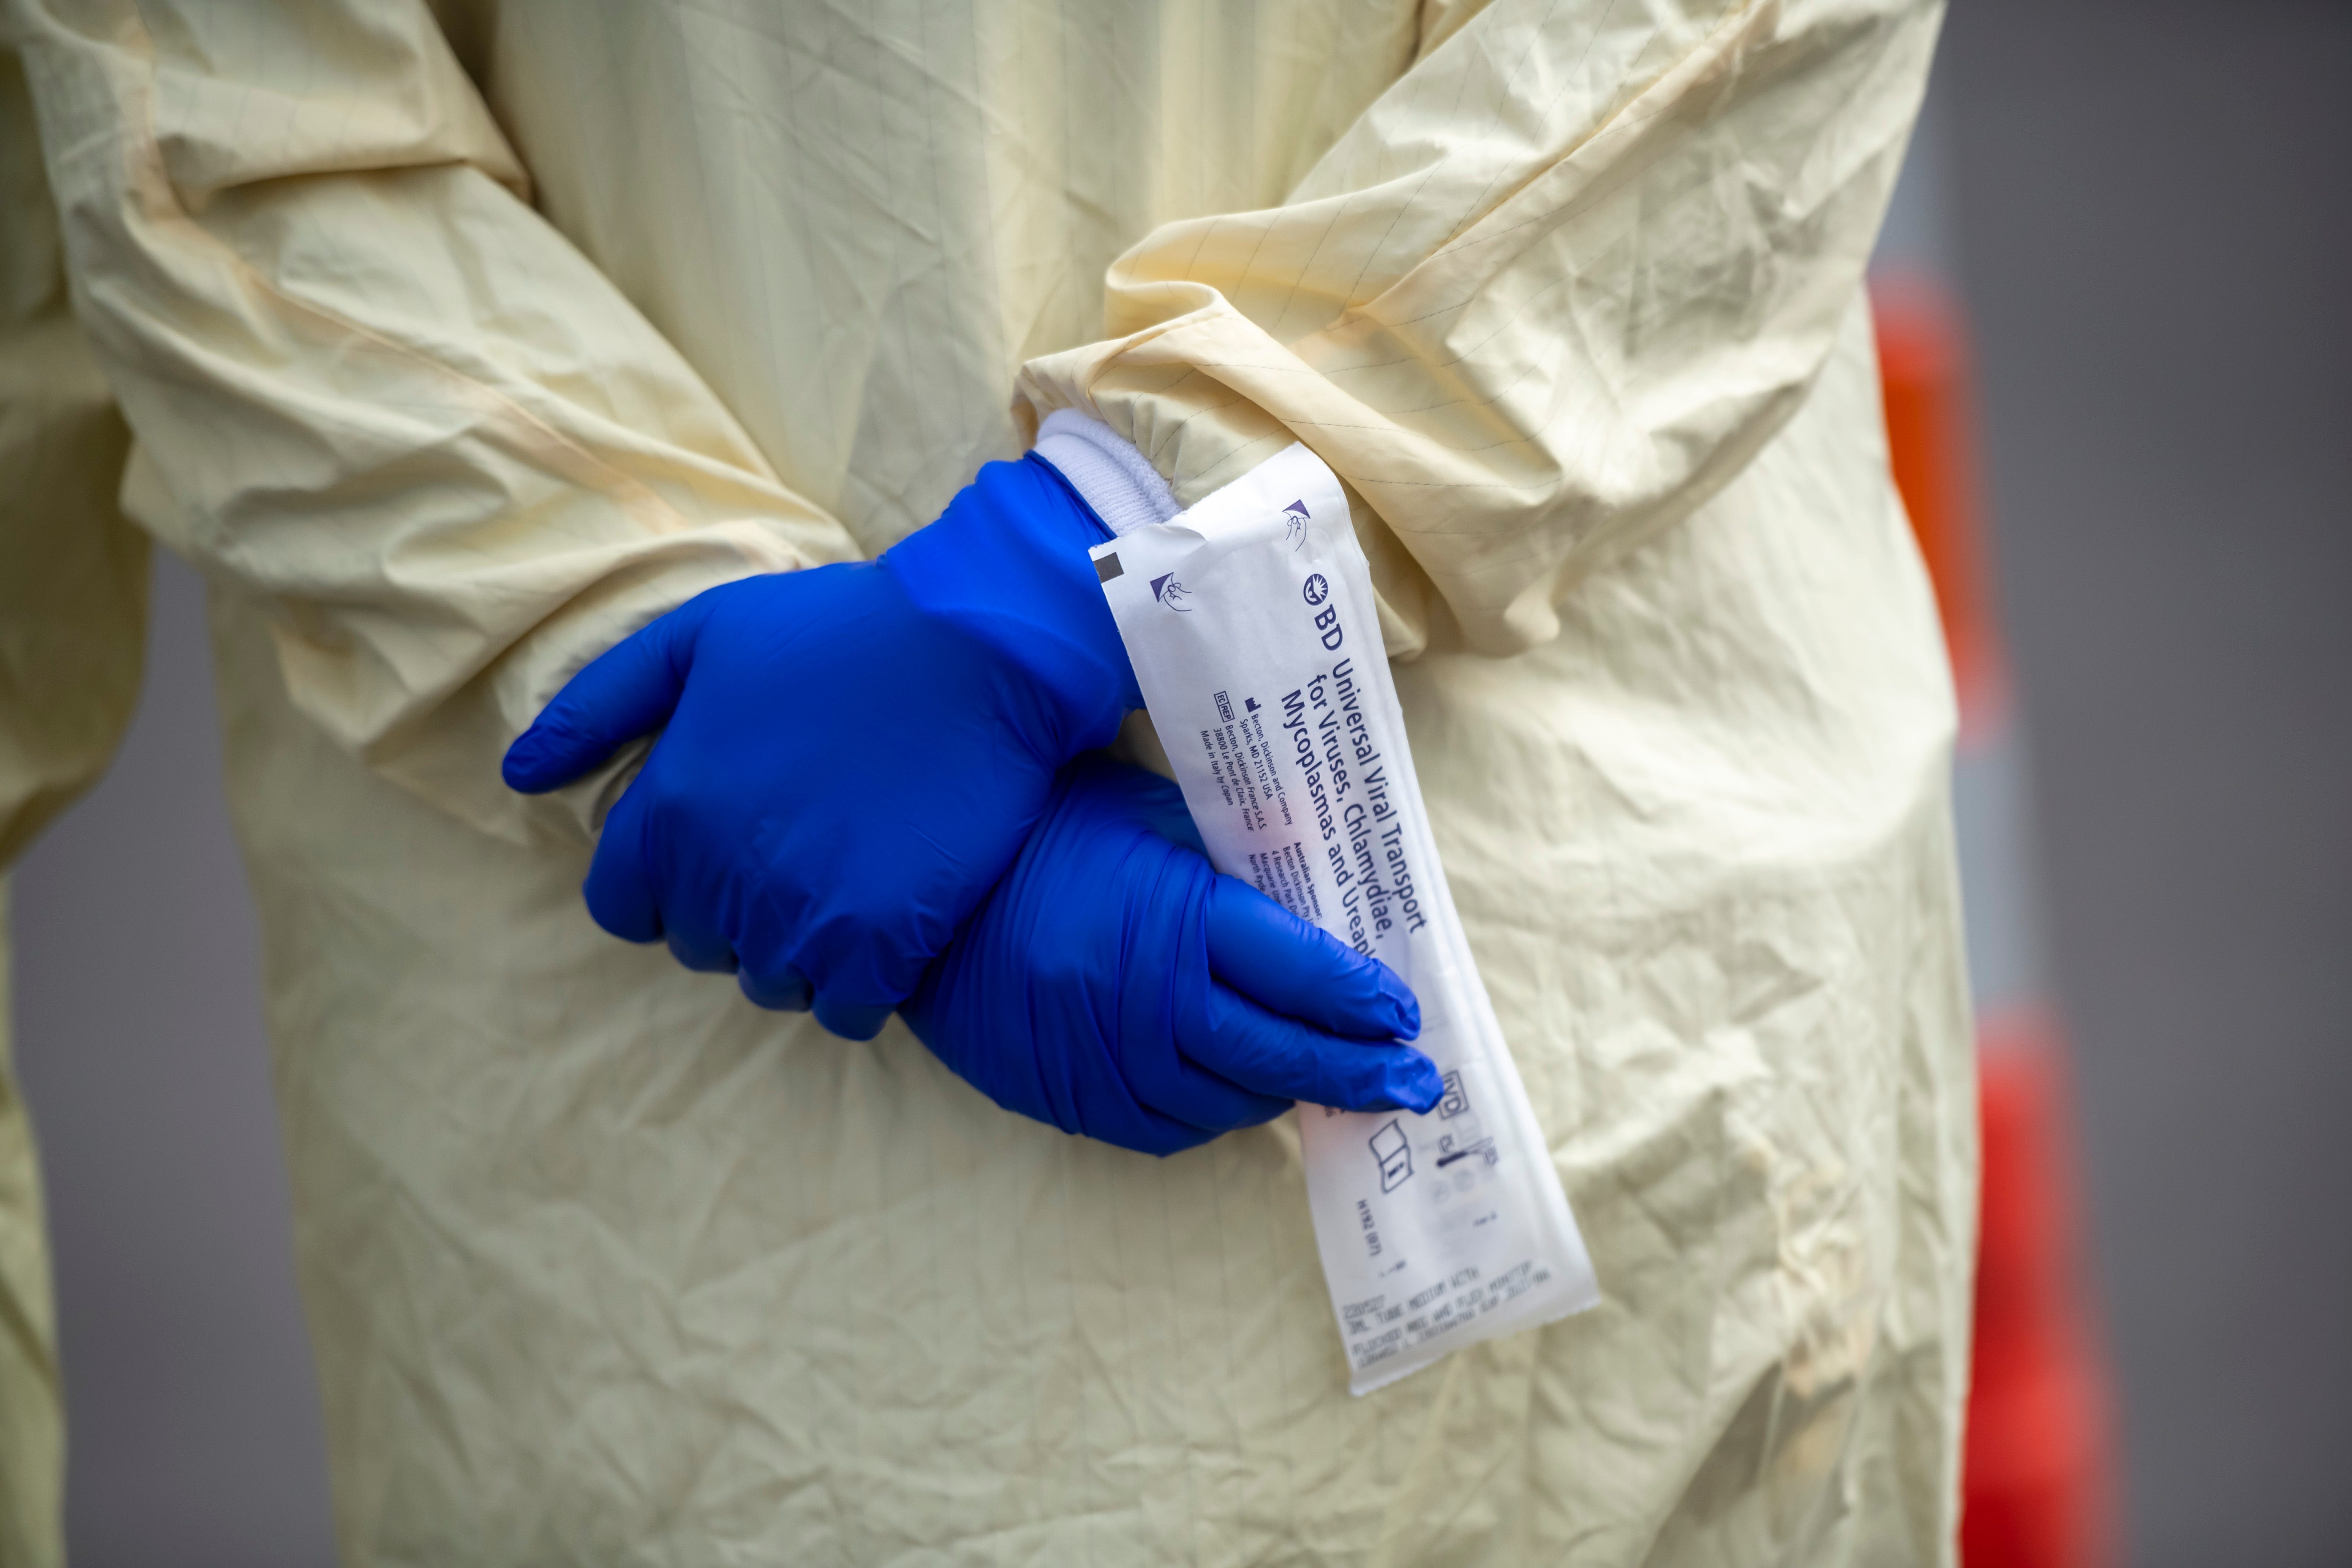 Registered nurse Amena Beslic, director of the emergency center at Beaumont hospital in Royal Oak, holds a screening kit for a variety of viruses, including the coronavirus, March 16, 2020. Members of the public concerned that they may be infected with the coronavirus were able to get screening done from their vehicles at the hospital.